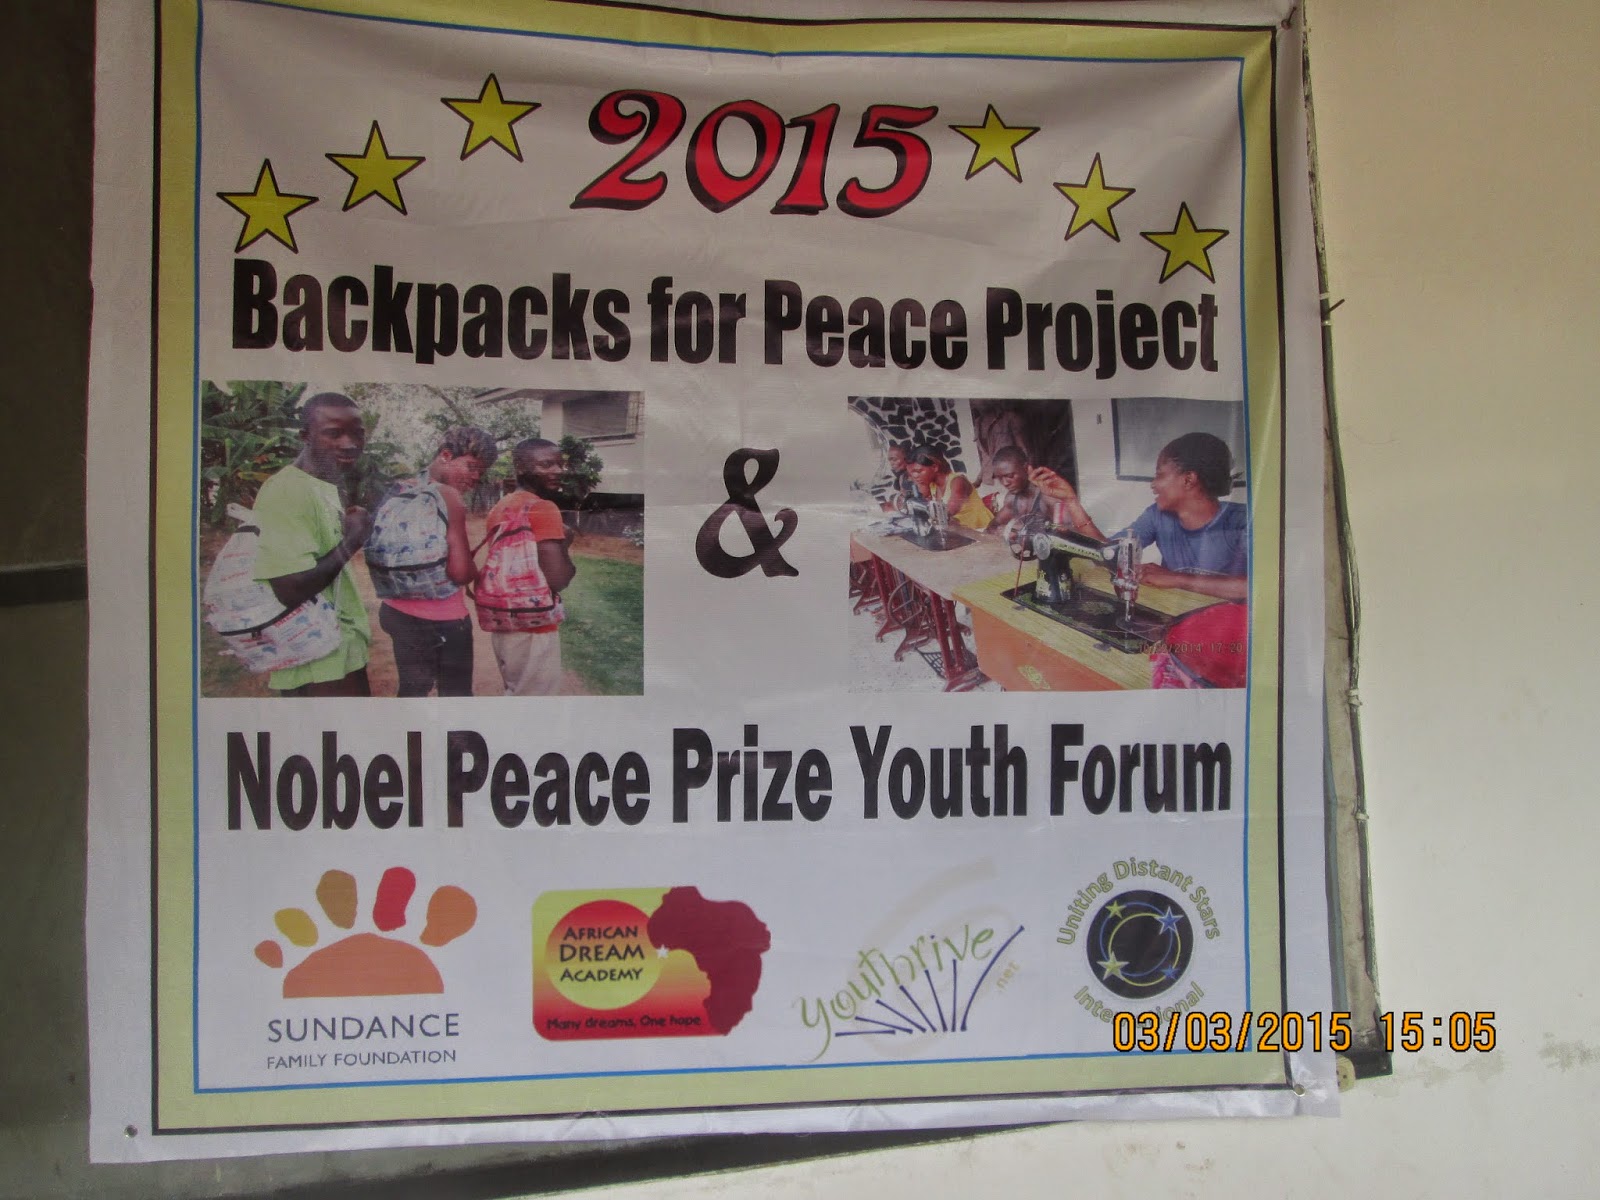 UDS Youth Vitually Participates in the Nobel Peace Prize Youth Forum